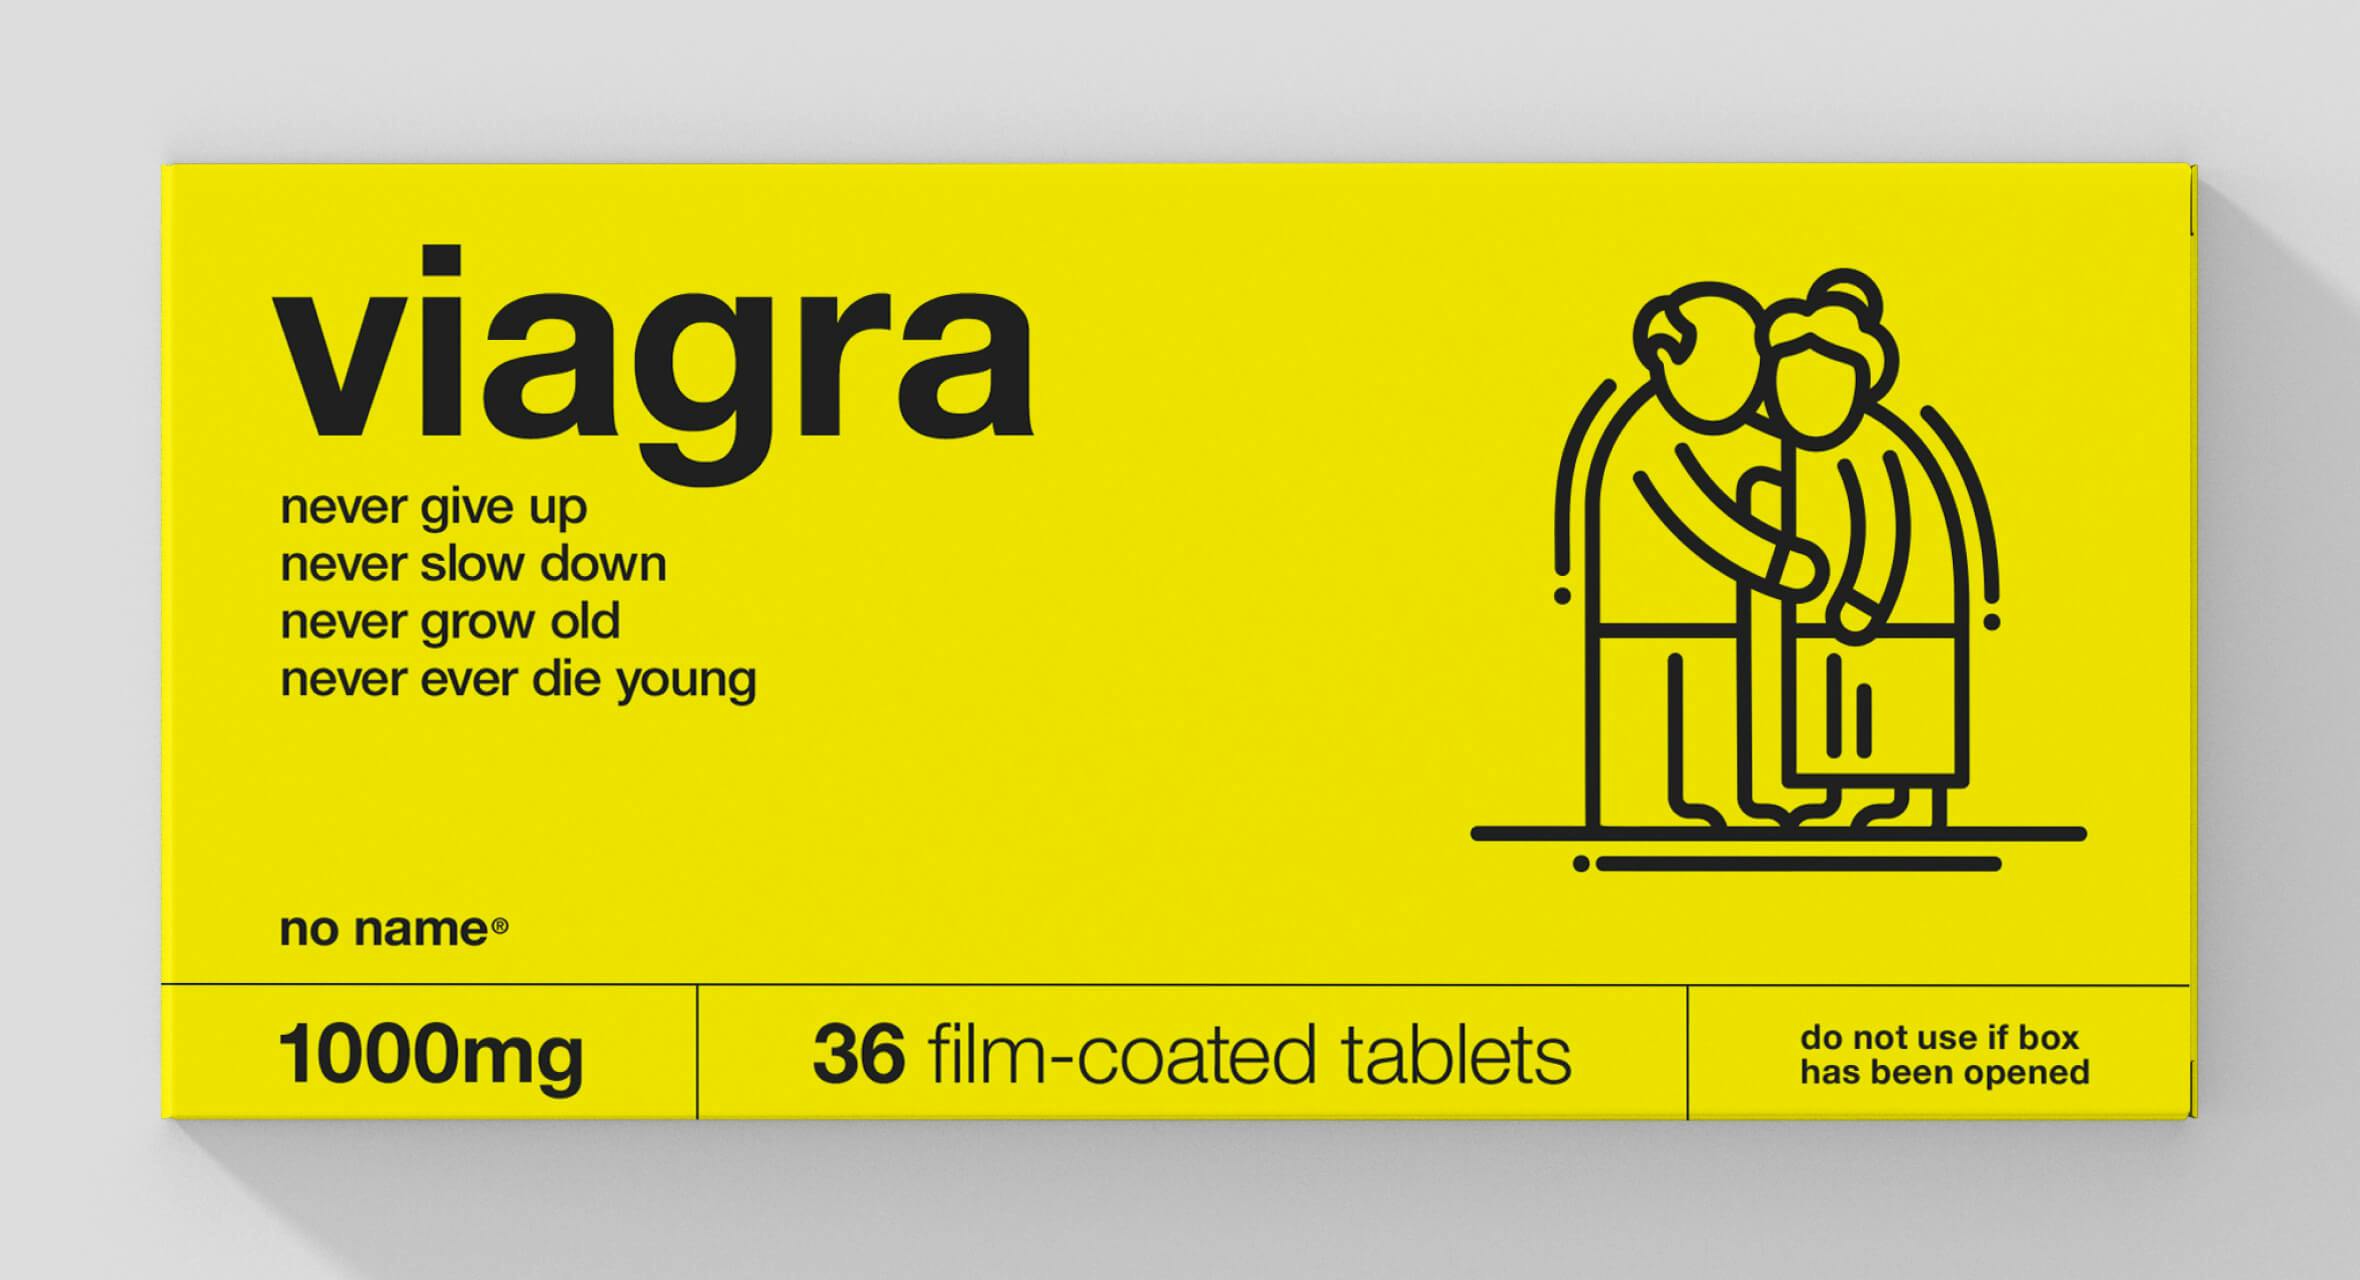 Mockup of a Viagra pharmaceutical pill box parodying the No Name brand identity. Inspired by the juxtaposition of No Name brands cost effective products in contrast to big pharmas costly products, Shawn imagined what such product packaging could look like.